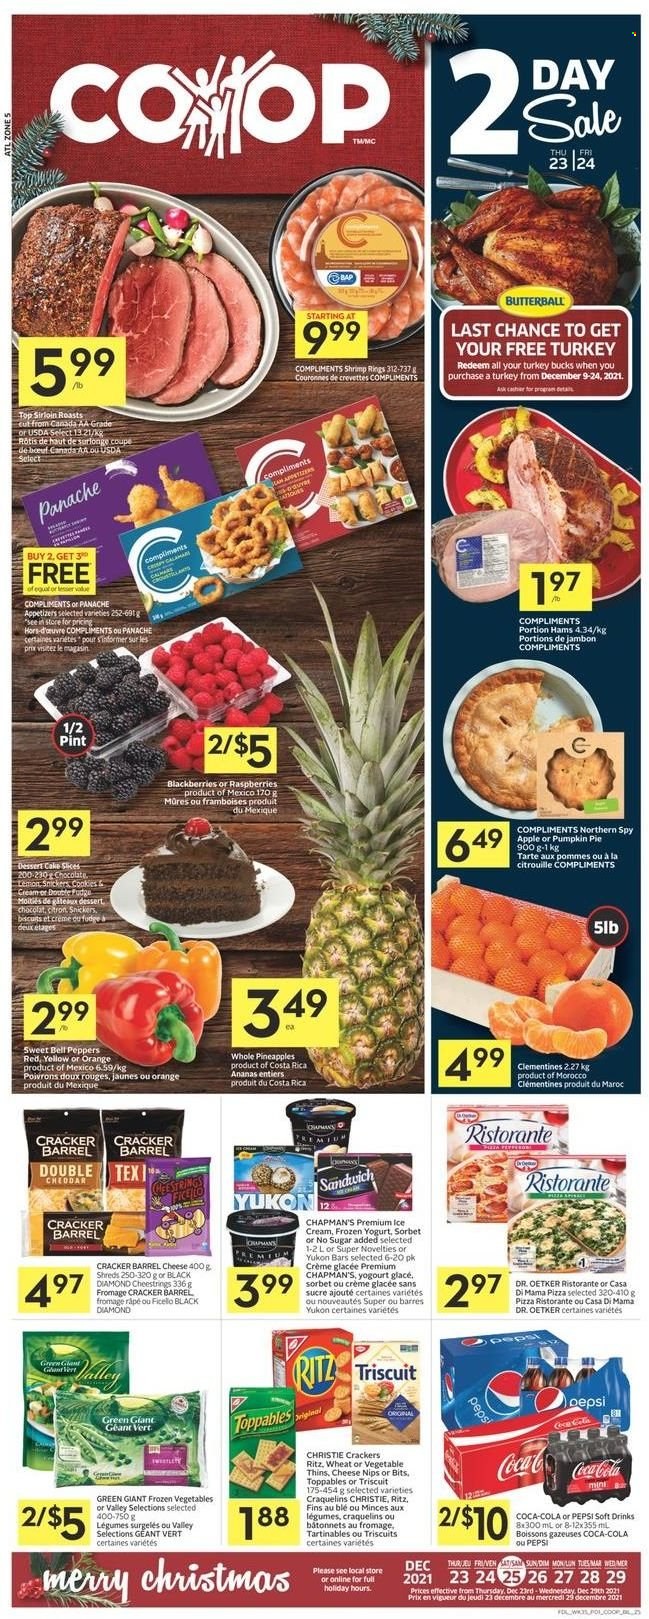 thumbnail - Co-op Flyer - December 23, 2021 - December 29, 2021 - Sales products - cake, pie, bell peppers, pumpkin, peppers, blackberries, clementines, pineapple, shrimps, pizza, Butterball, string cheese, Dr. Oetker, yoghurt, ice cream, frozen vegetables, cookies, fudge, Snickers, crackers, biscuit, NIPS, RITZ, Thins, Coca-Cola, Pepsi, soft drink, oranges. Page 1.